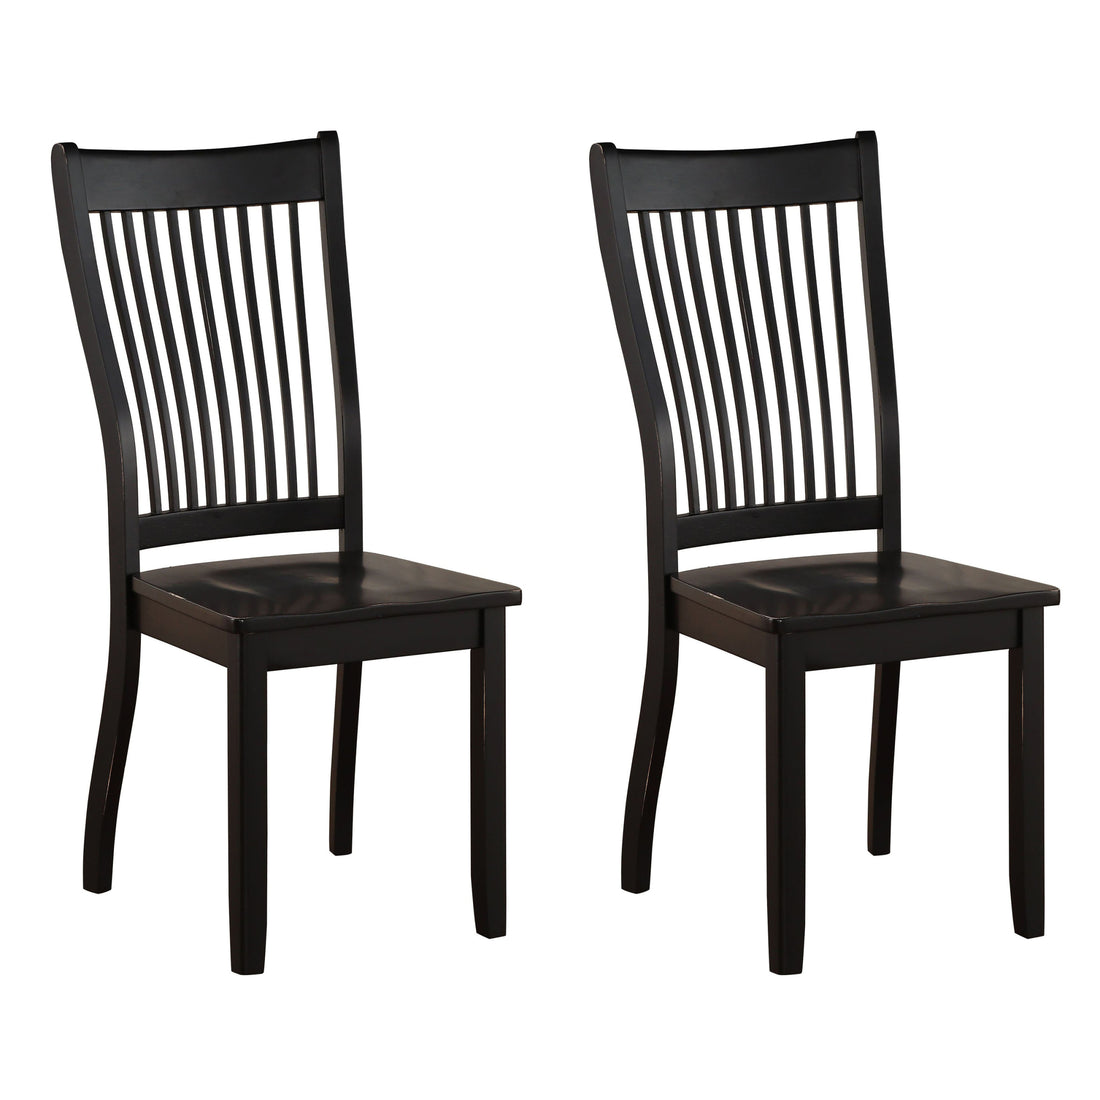 Black Side Chairs With Slatted Backrest Set Of 2